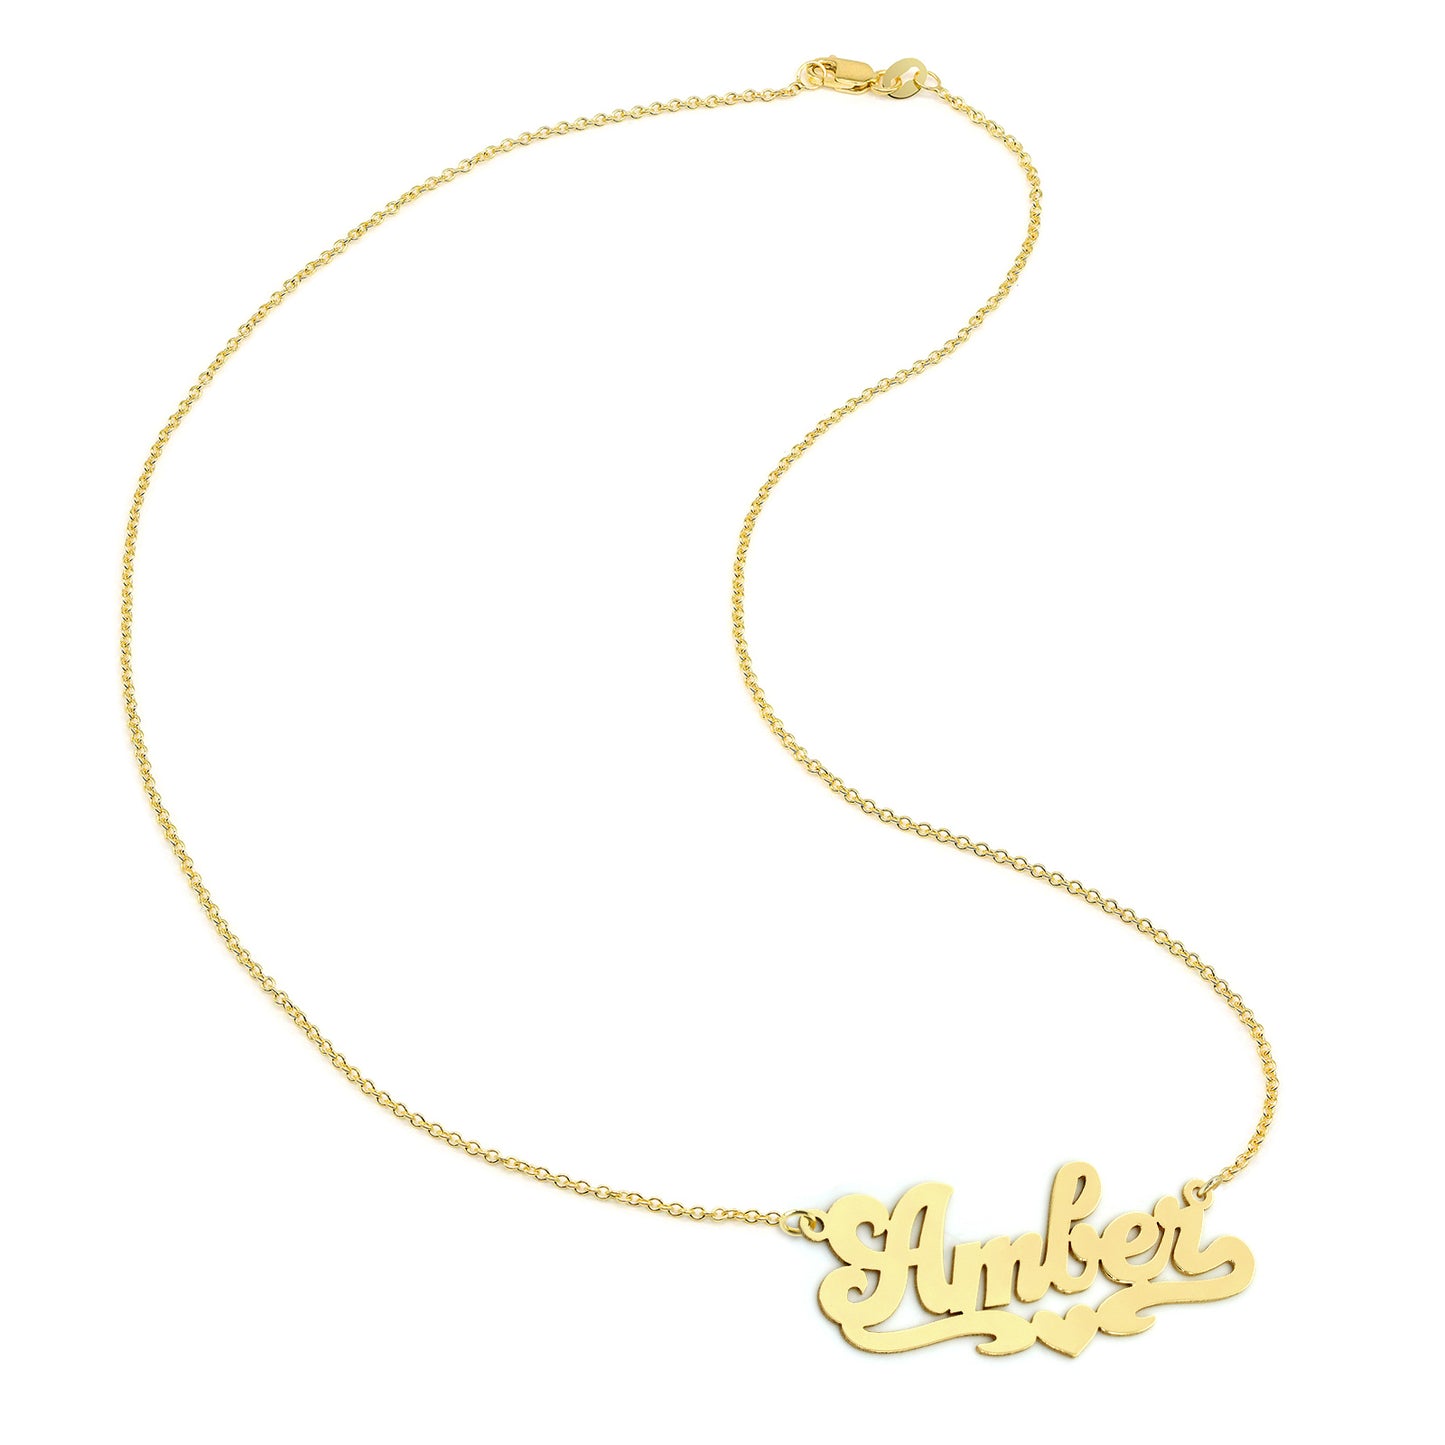 Personalized 14K Gold Name Plate Necklace